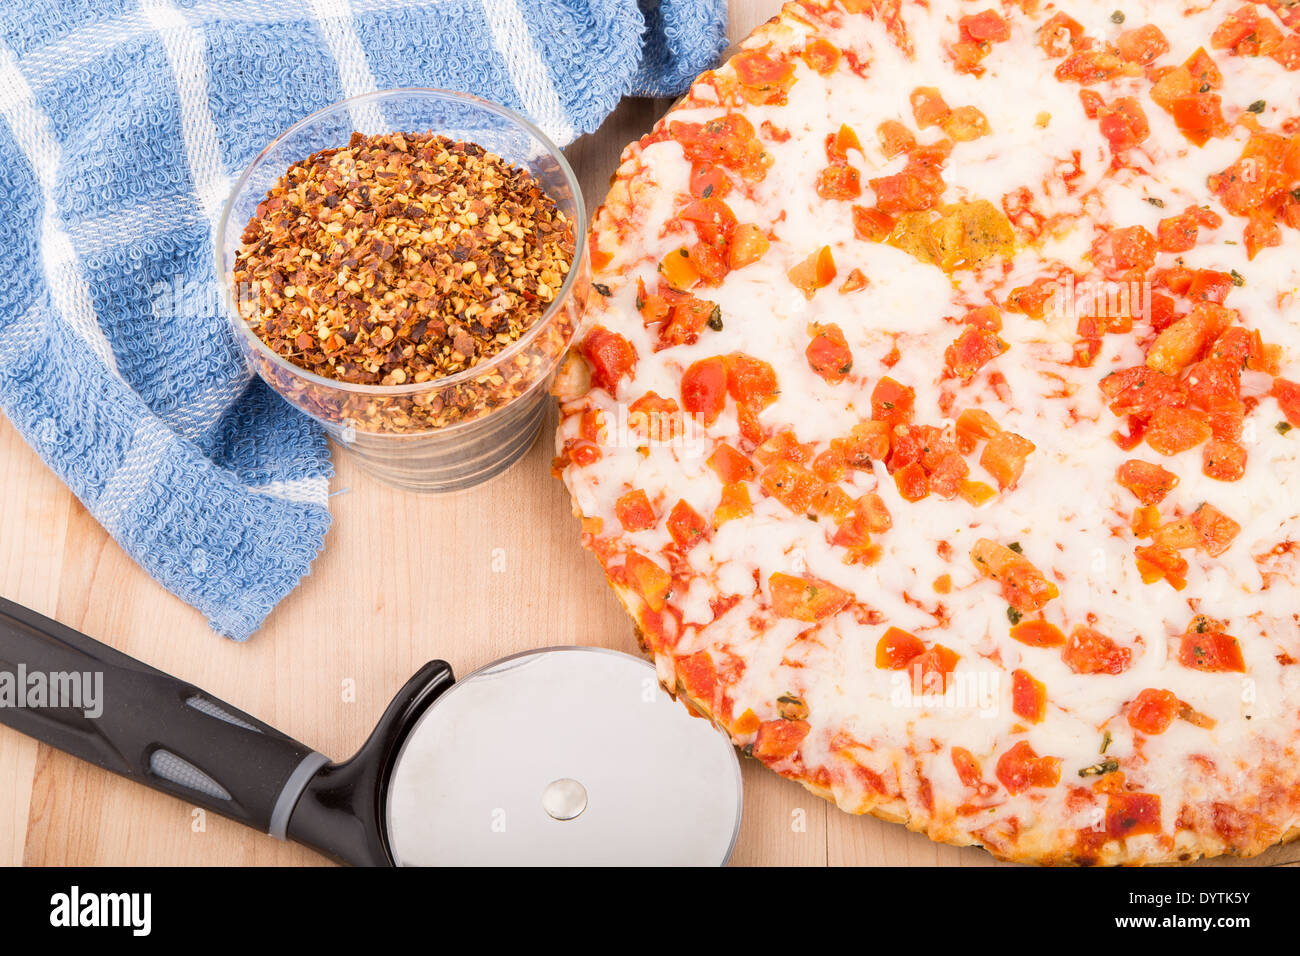 Fresh, hot tomato pizza on a wood cutting board with cutting wheel, hot pepper flakes, and a blue towel Stock Photo